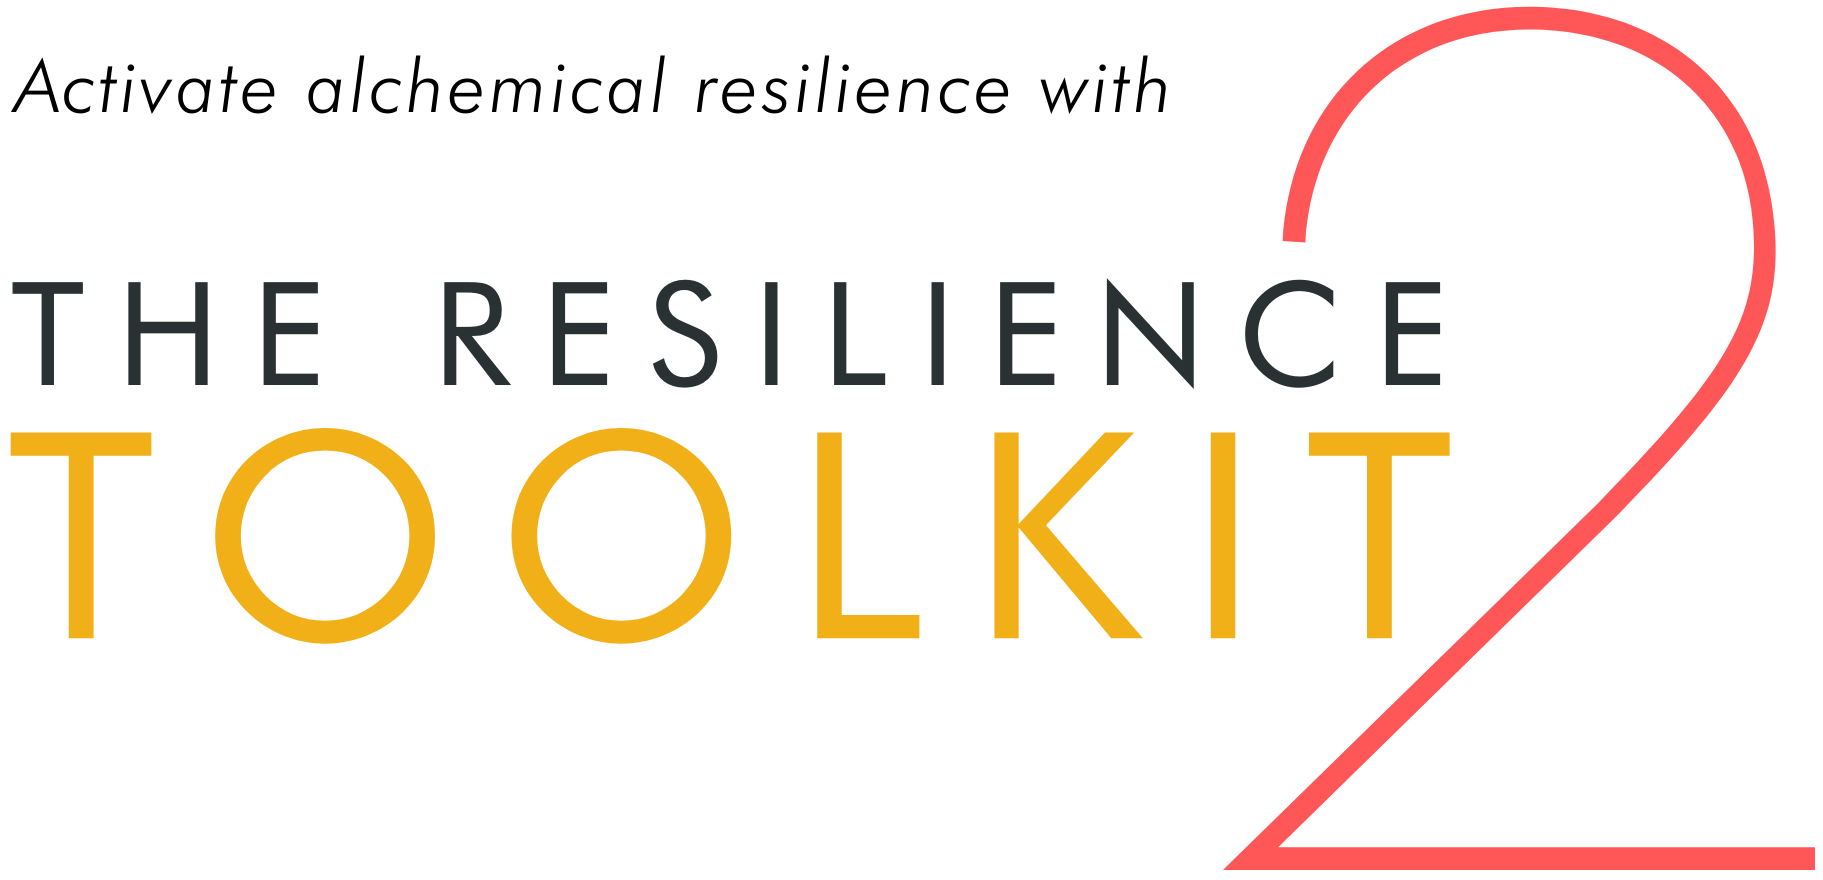 Activate alchemical resilience with The Resilience Toolkit 2